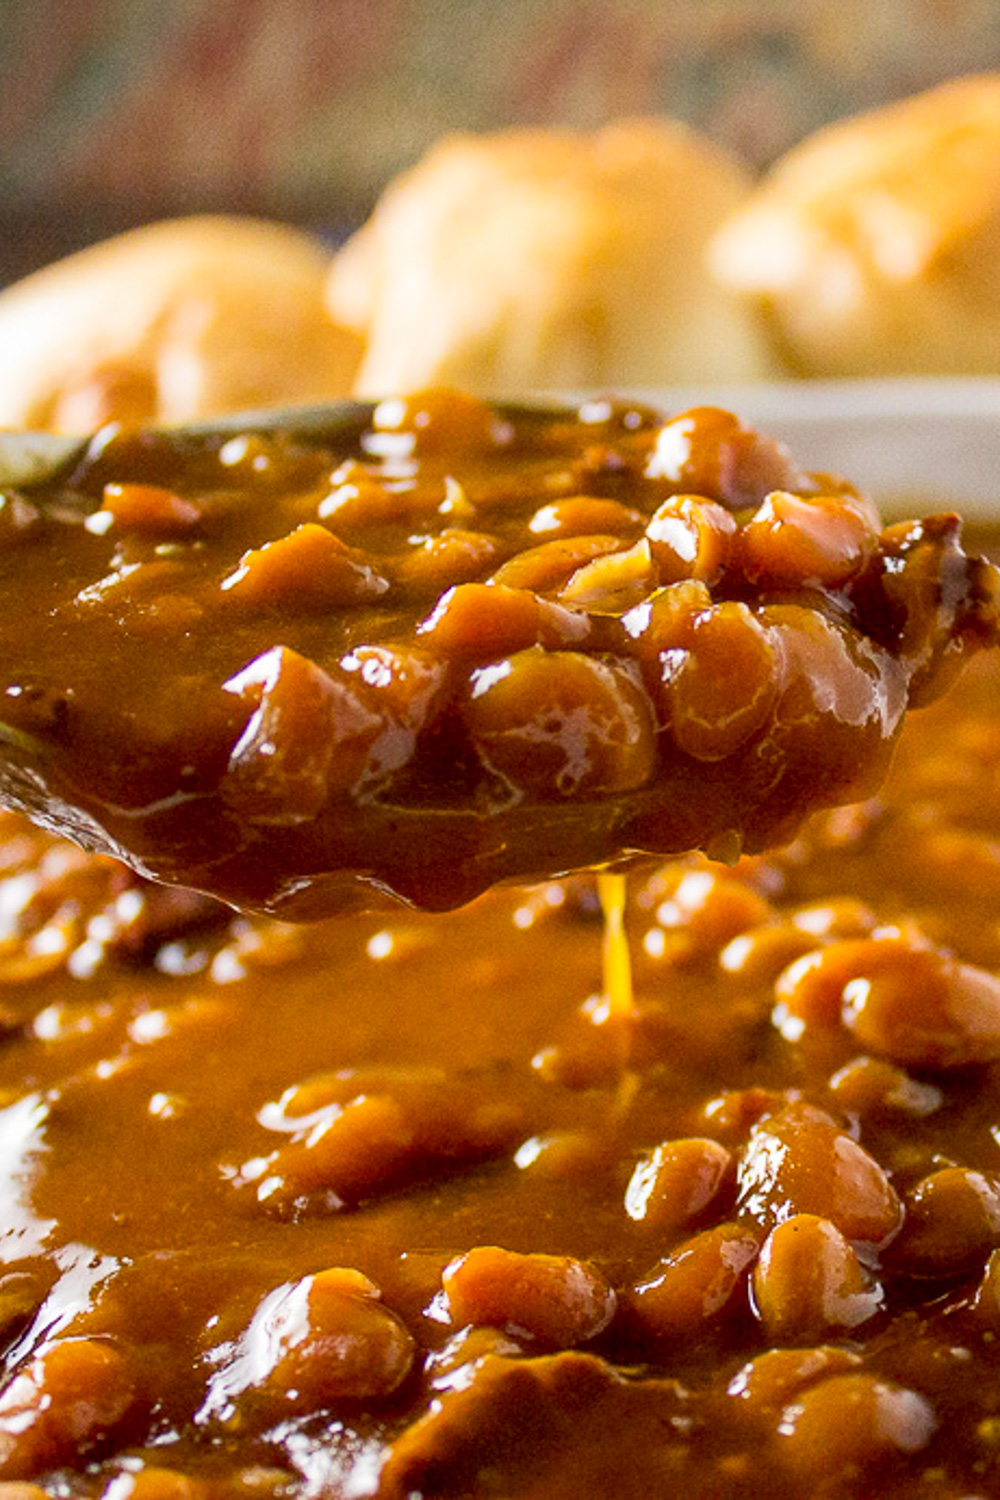 spoonful of baked beans over pot of baked beans.